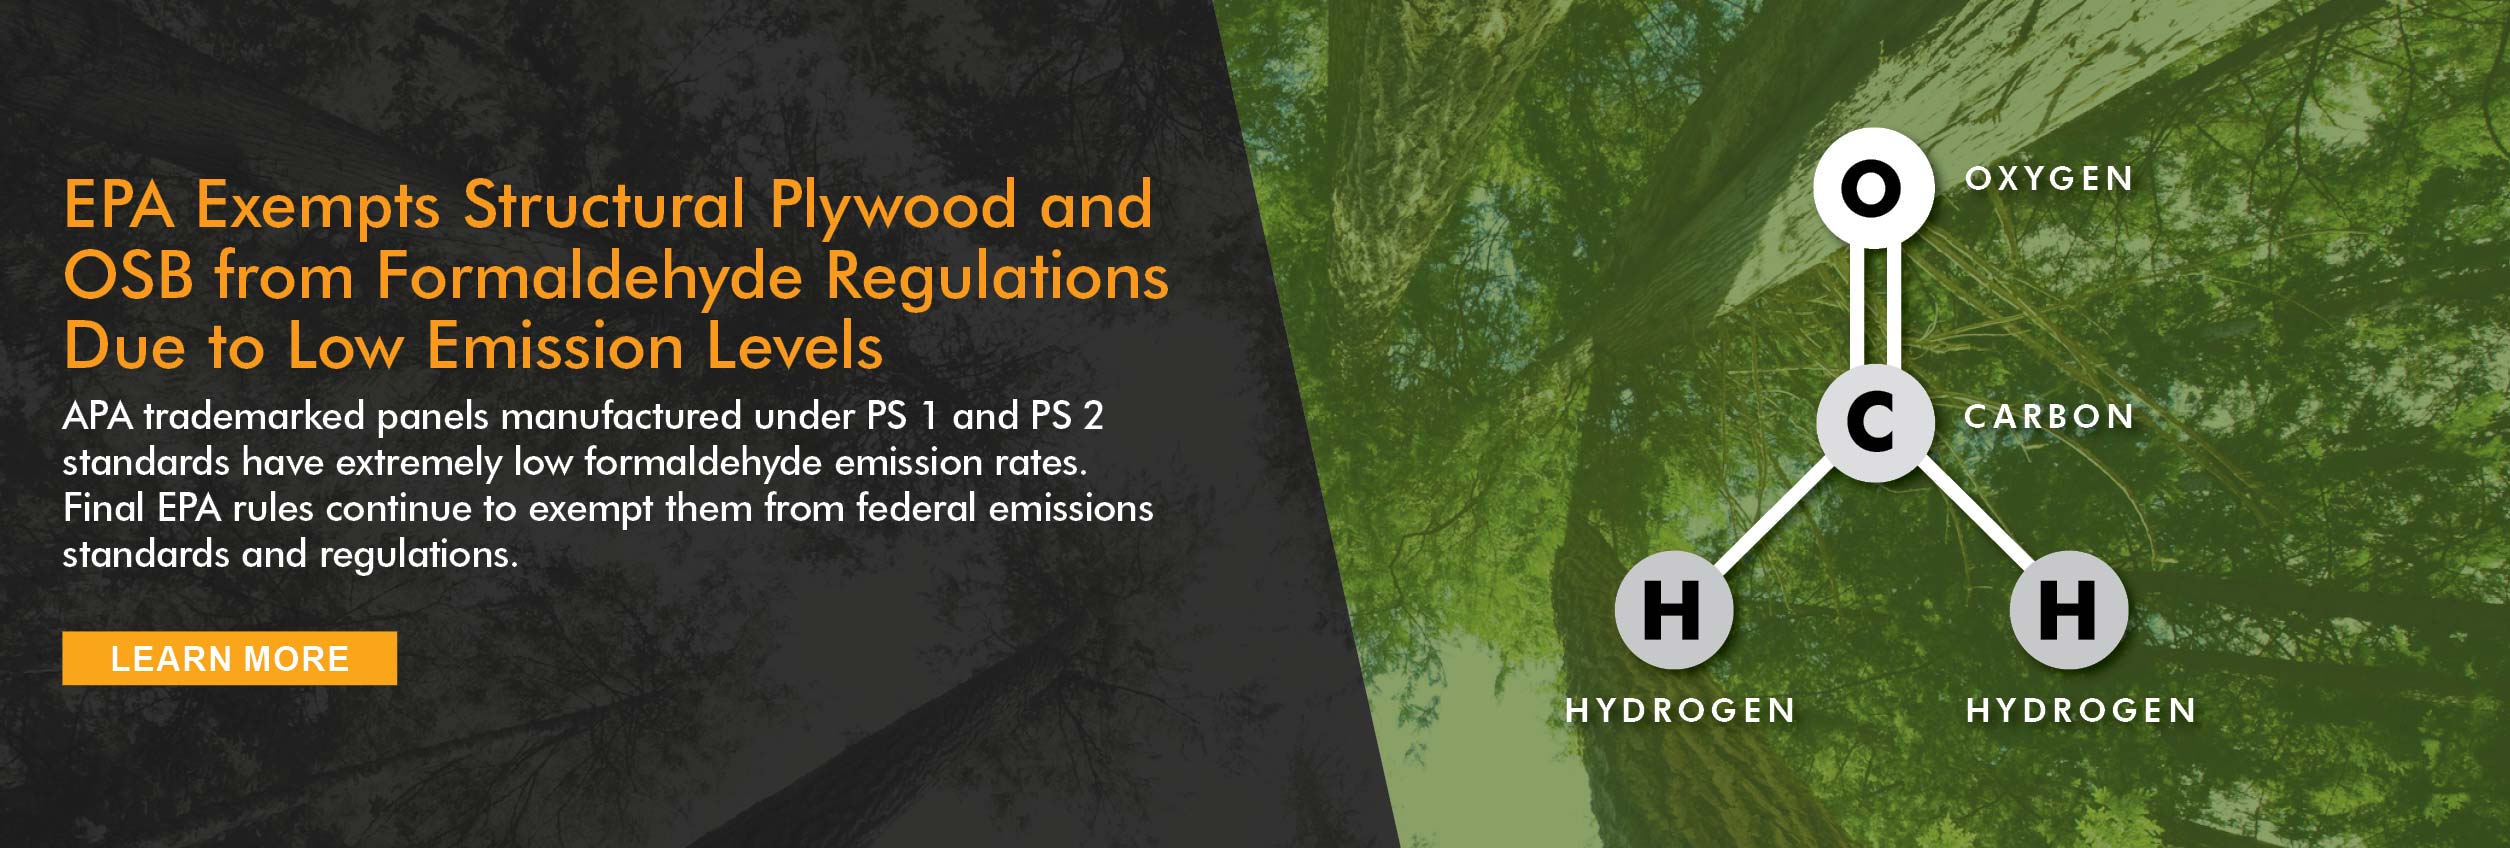 Structural plywood and oriented strand board (OSB) are exempt from EPA regs